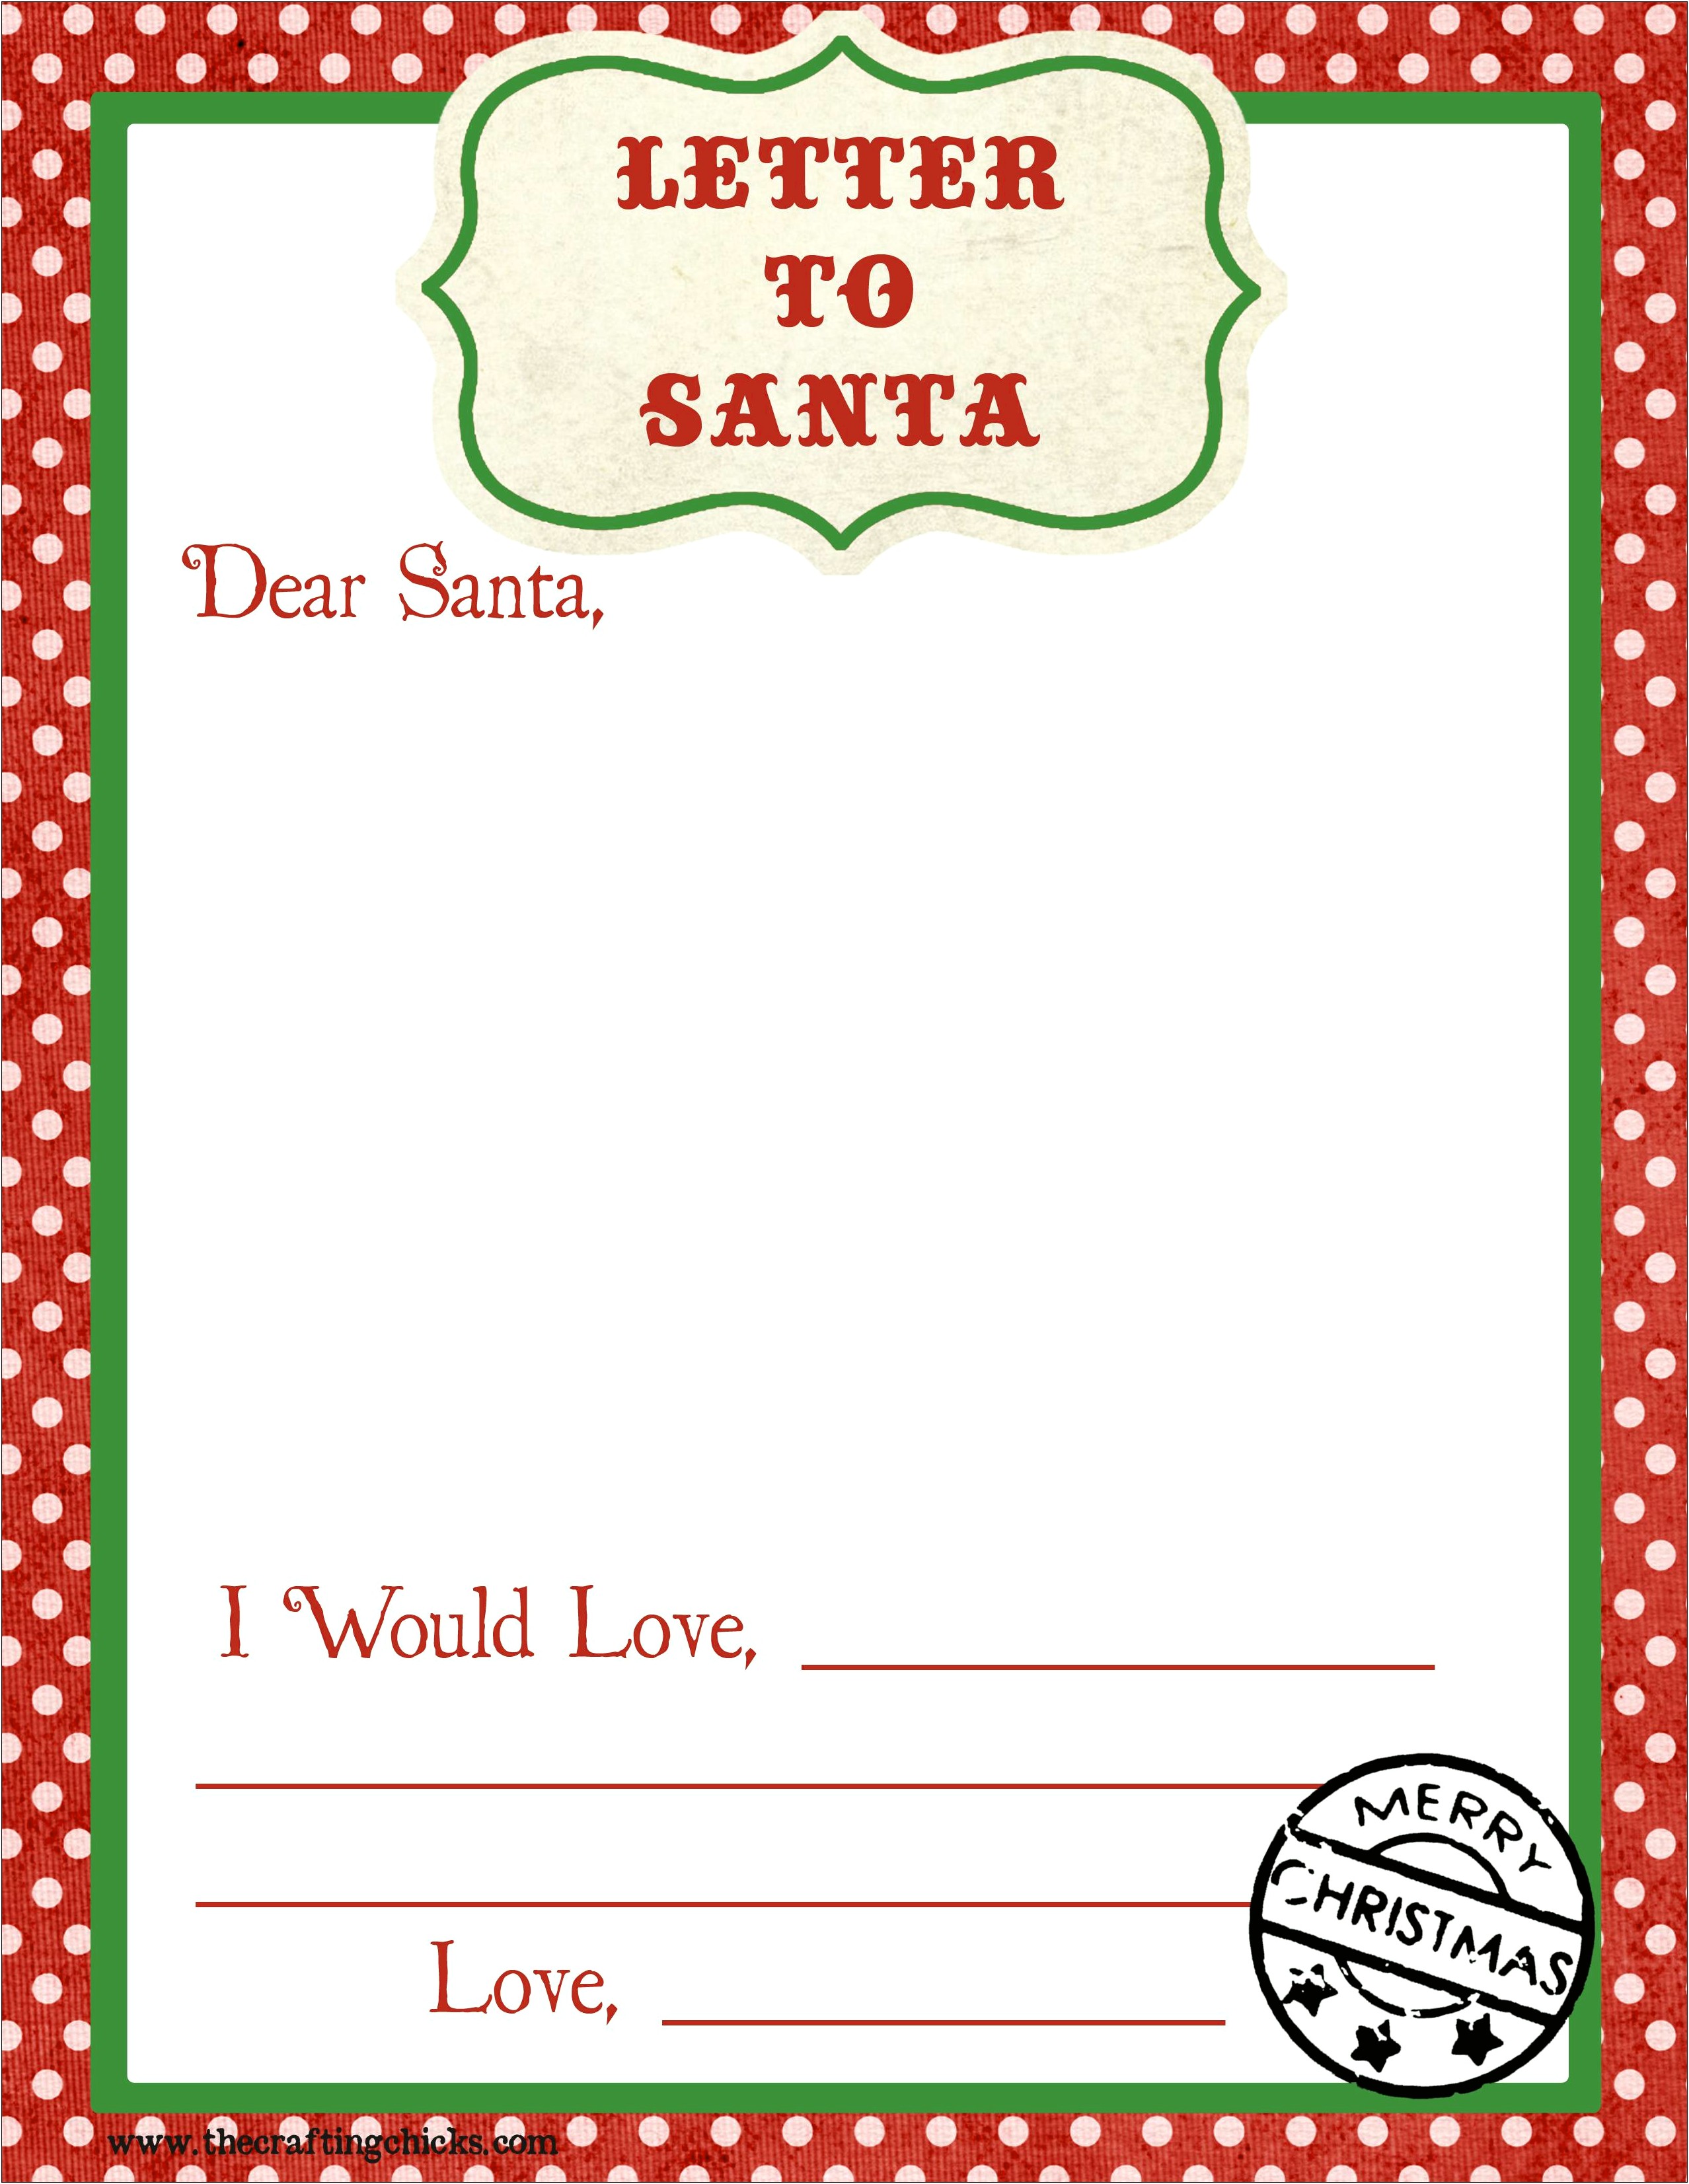 a-letter-from-santa-free-template-templates-resume-designs-ezxj8qo1ep